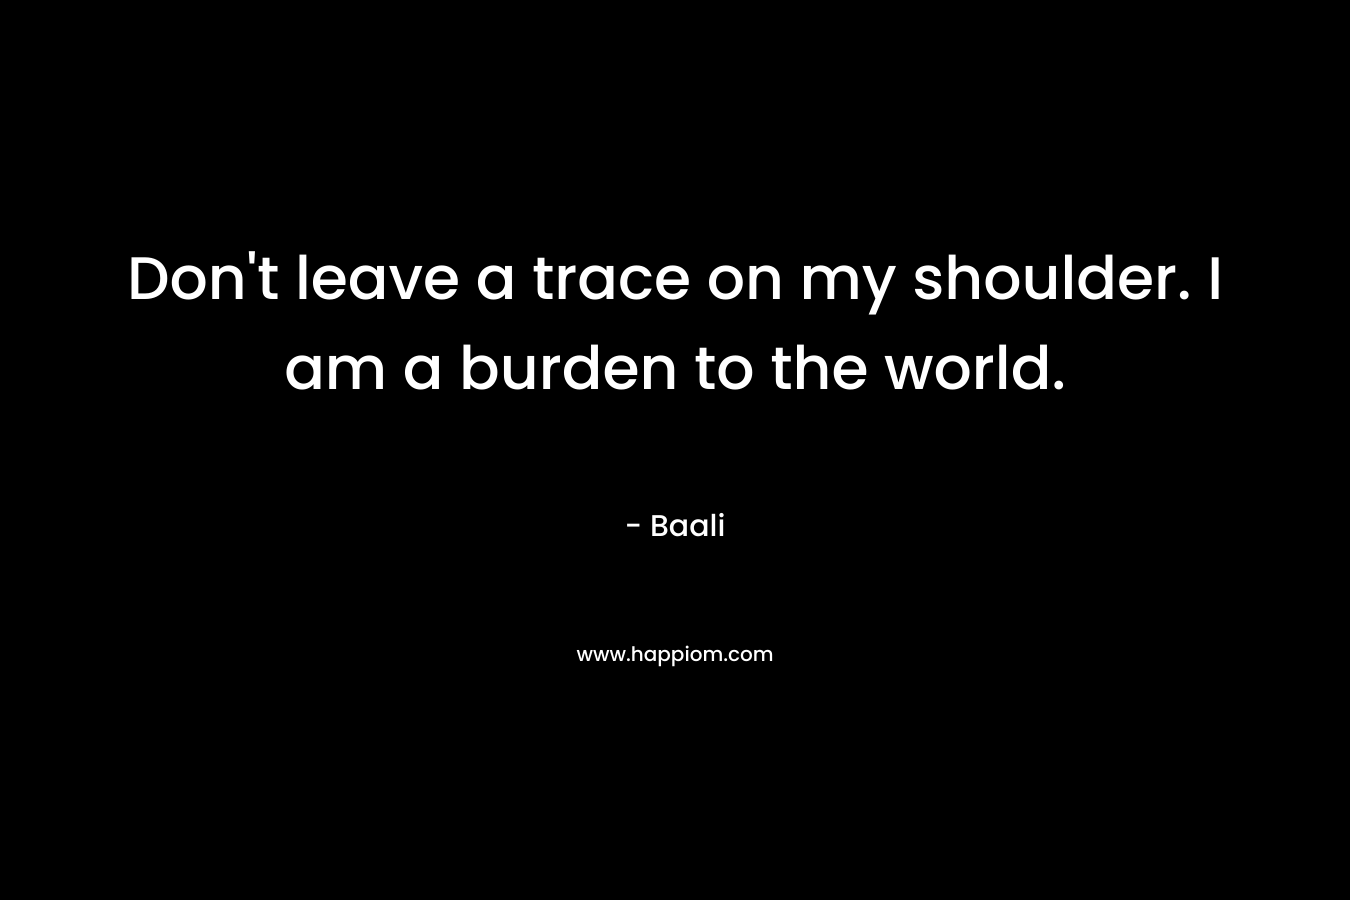 Don’t leave a trace on my shoulder. I am a burden to the world. – Baali